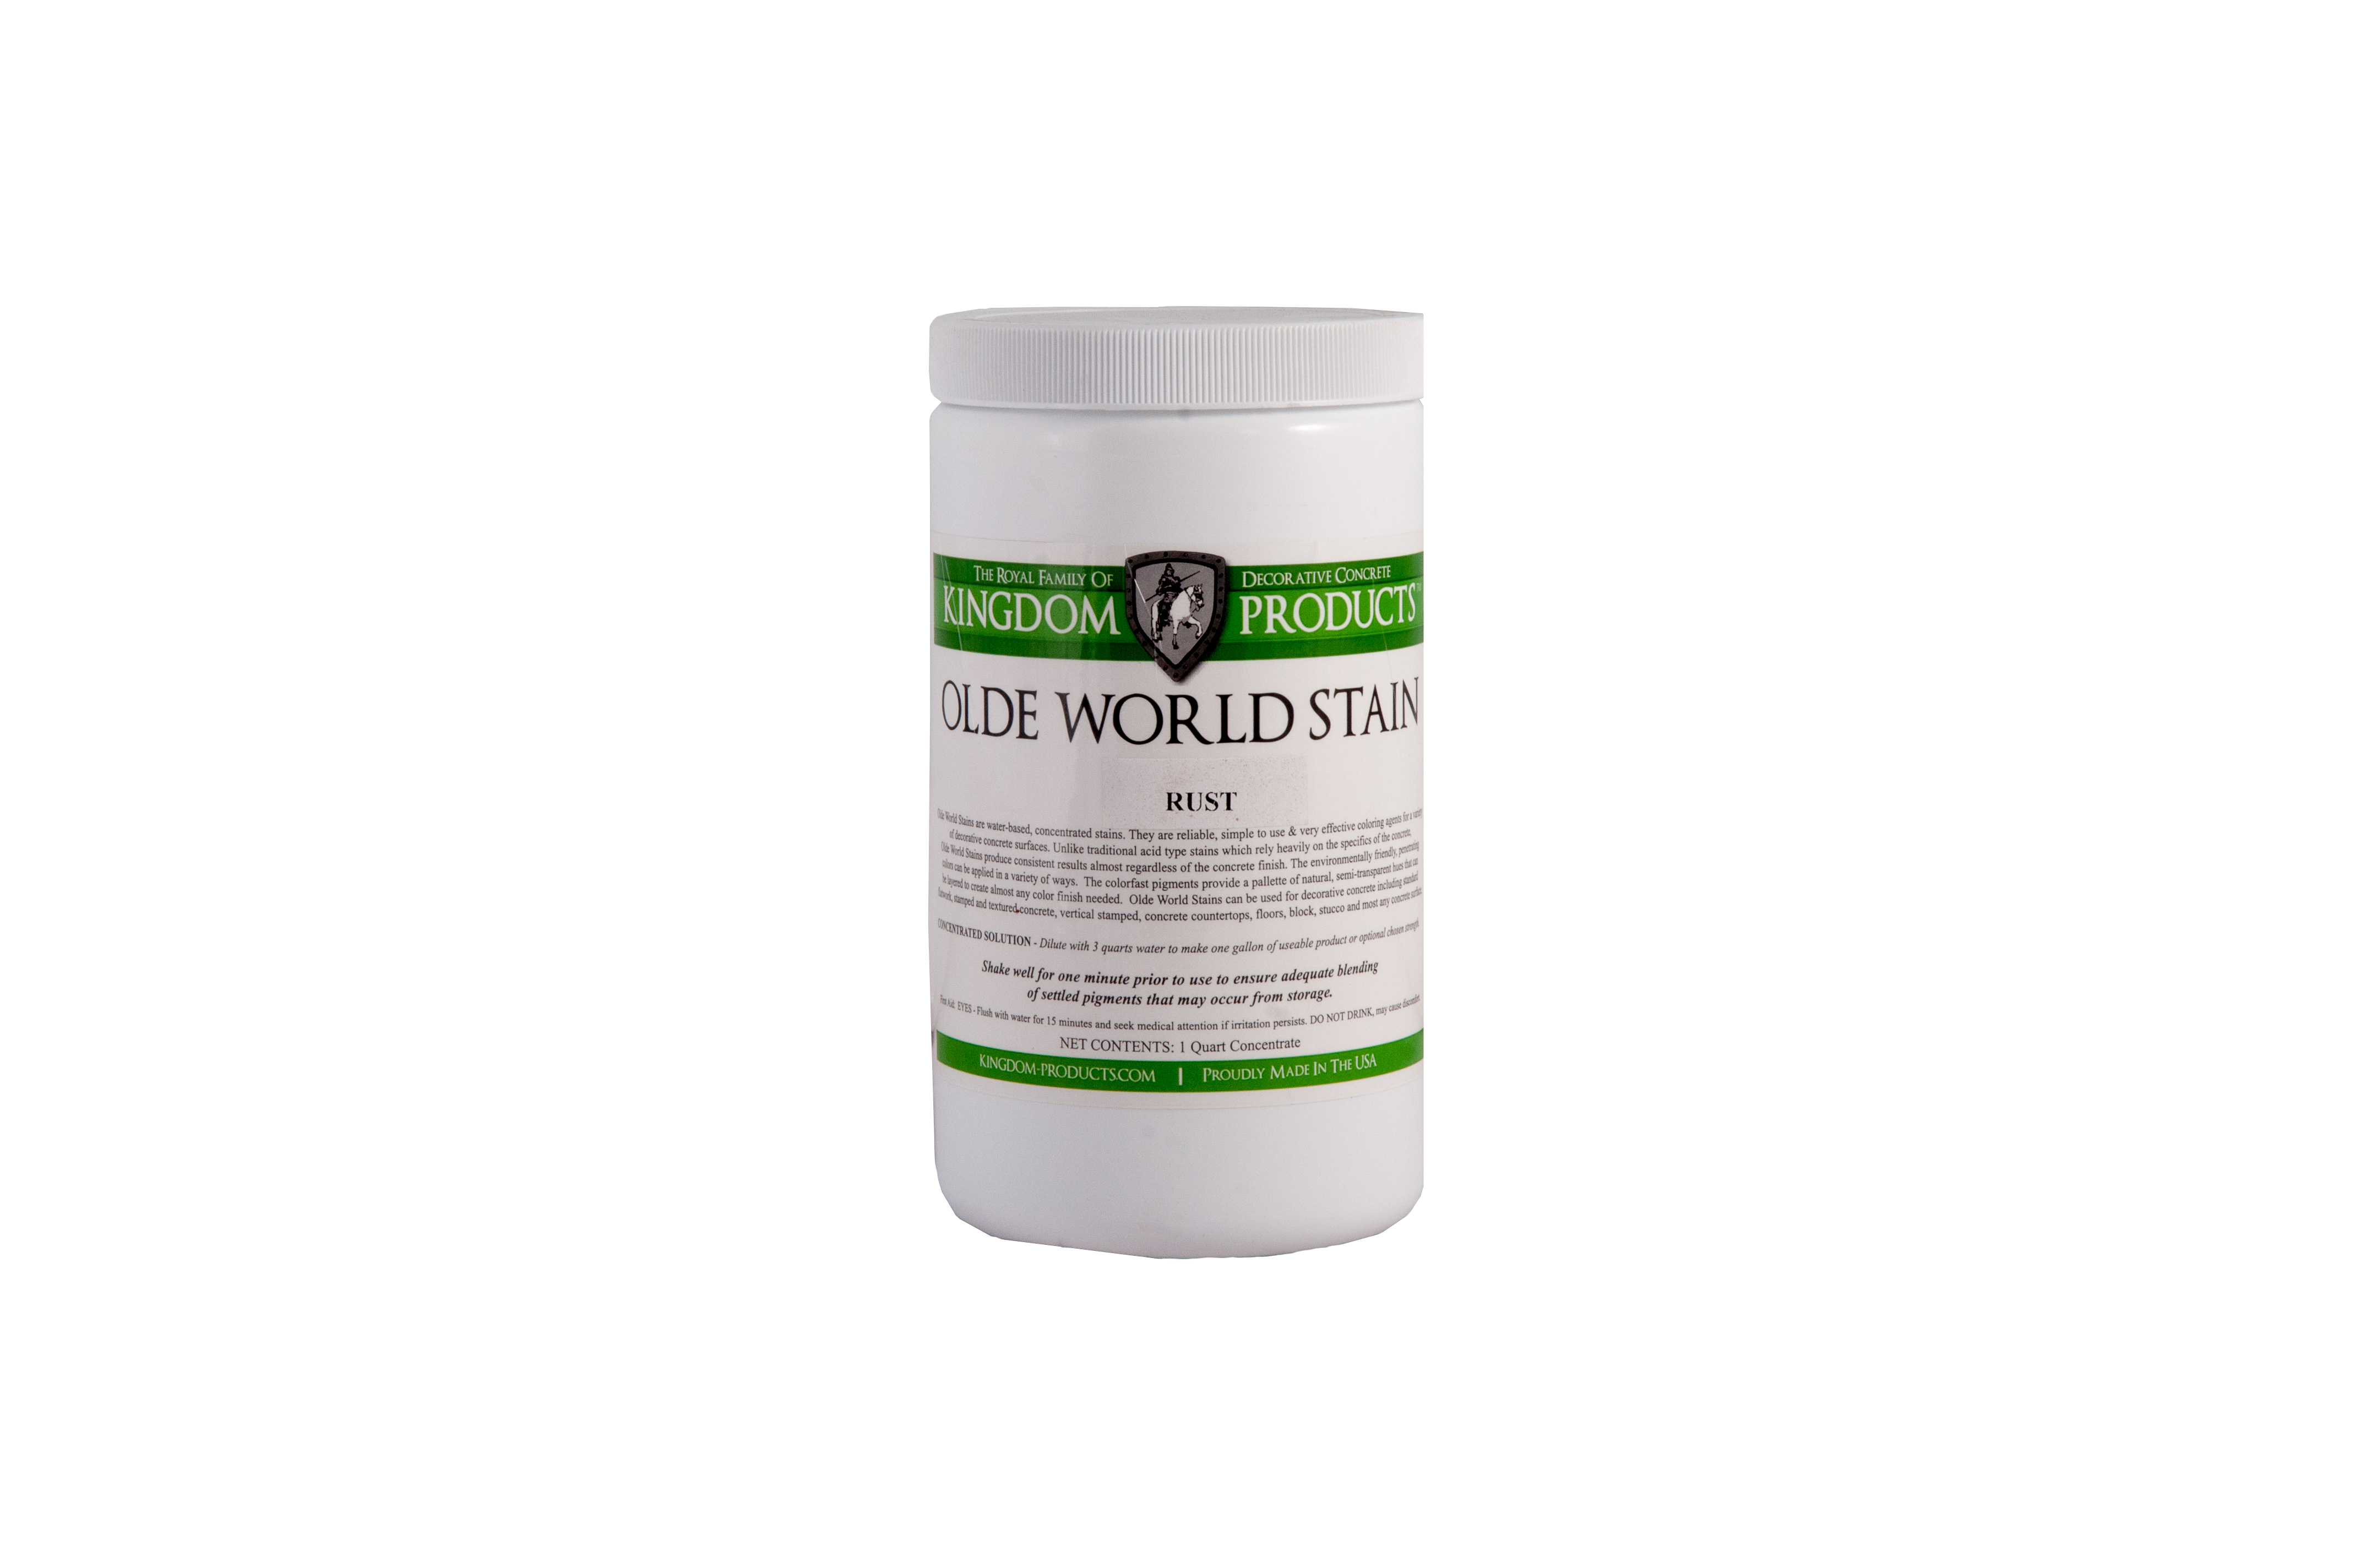 Olde World Stain Waterbased Concrete Kingdom Products